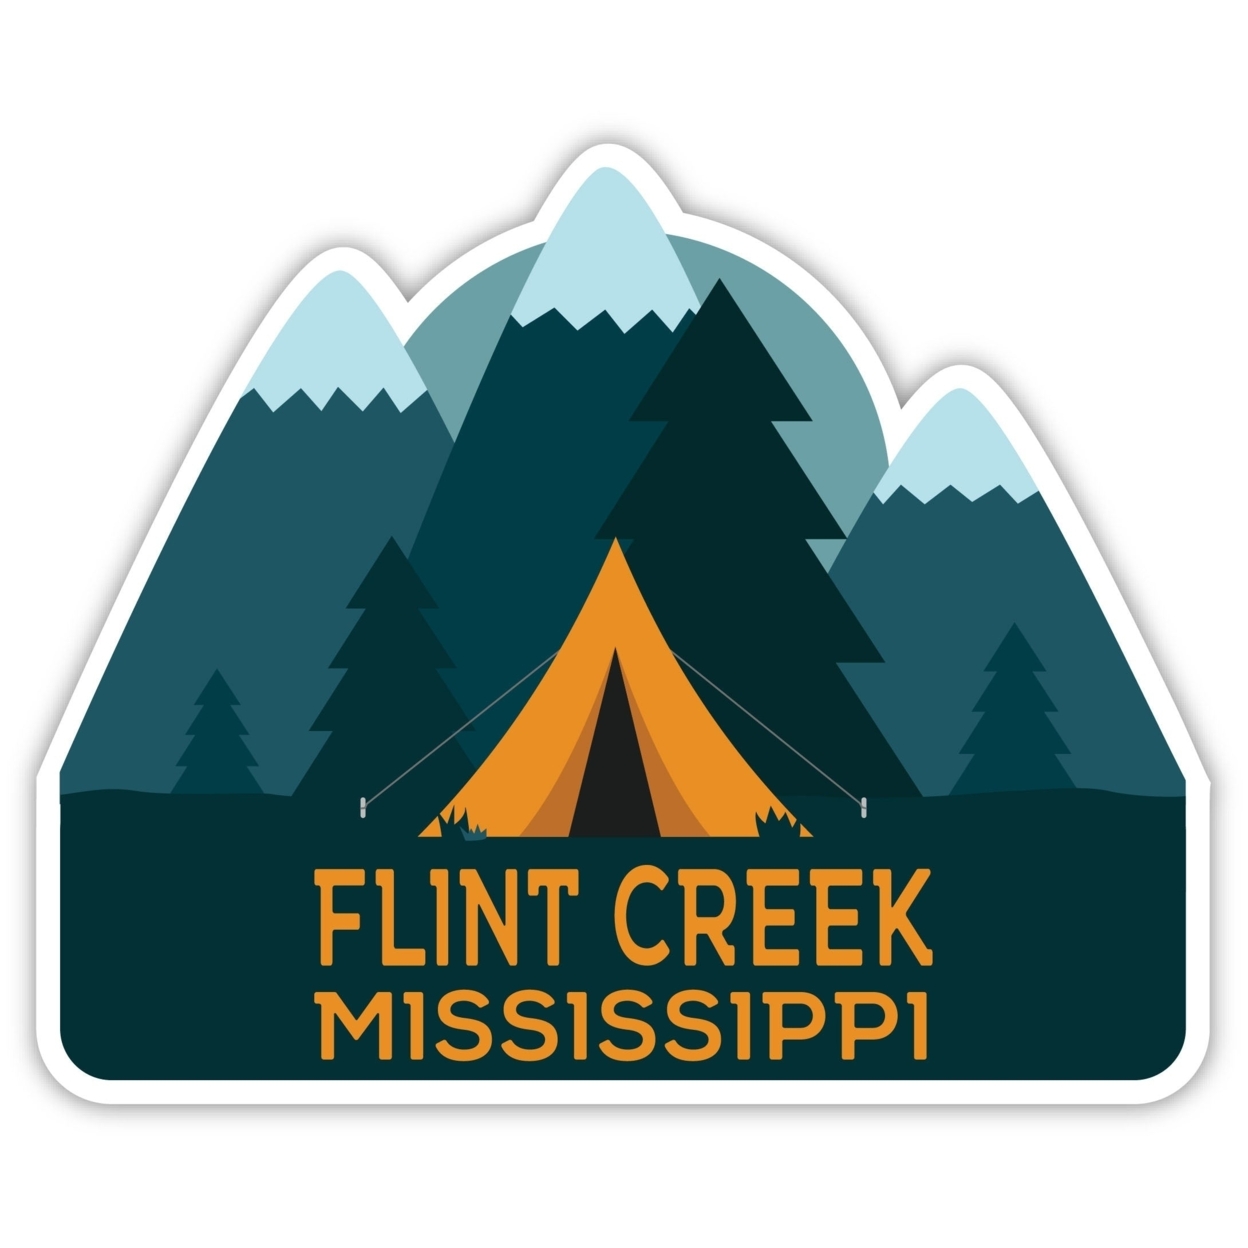 Flint Creek Mississippi Souvenir Decorative Stickers (Choose Theme And Size) - 4-Pack, 2-Inch, Tent